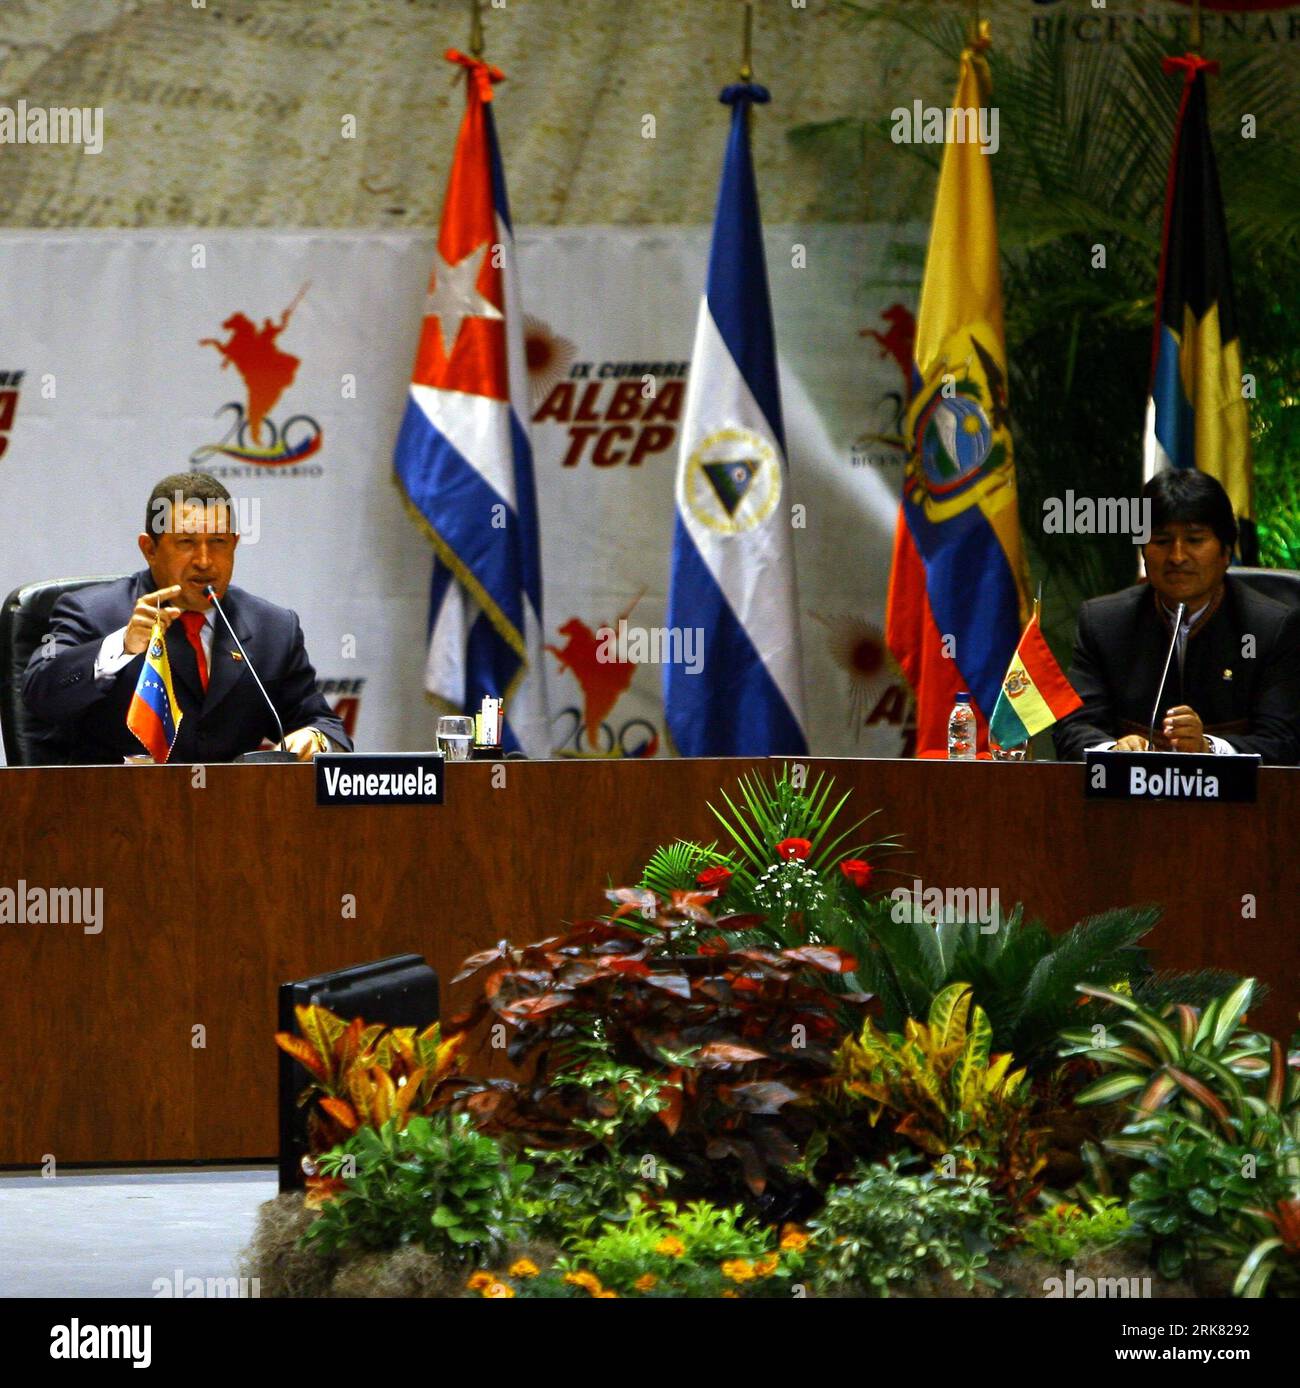 Bildnummer: 53957707  Datum: 19.04.2010  Copyright: imago/Xinhua (100420) -- CARACAS, April 20, 2010 (Xinhua) -- Venezuelan President Hugo Chavez (L) speaks at the 9th Bolivarian Alliance for America (ALBA) Summit in Caracas, capital of Venezuela, April 19, 2010. As Latin America celebrates the bicentennial of the beginning of its fight for independence, the eight member nations of ALBA on Monday vowed to further promote political, economic and social integration. (Xinhua/Juan Carlos Hernandez) (zcq) (2)VENEZUELA-CARACAS-ALBA SUMMIT PUBLICATIONxNOTxINxCHN People Politik kbdig xkg 2010 quadrat Stock Photo